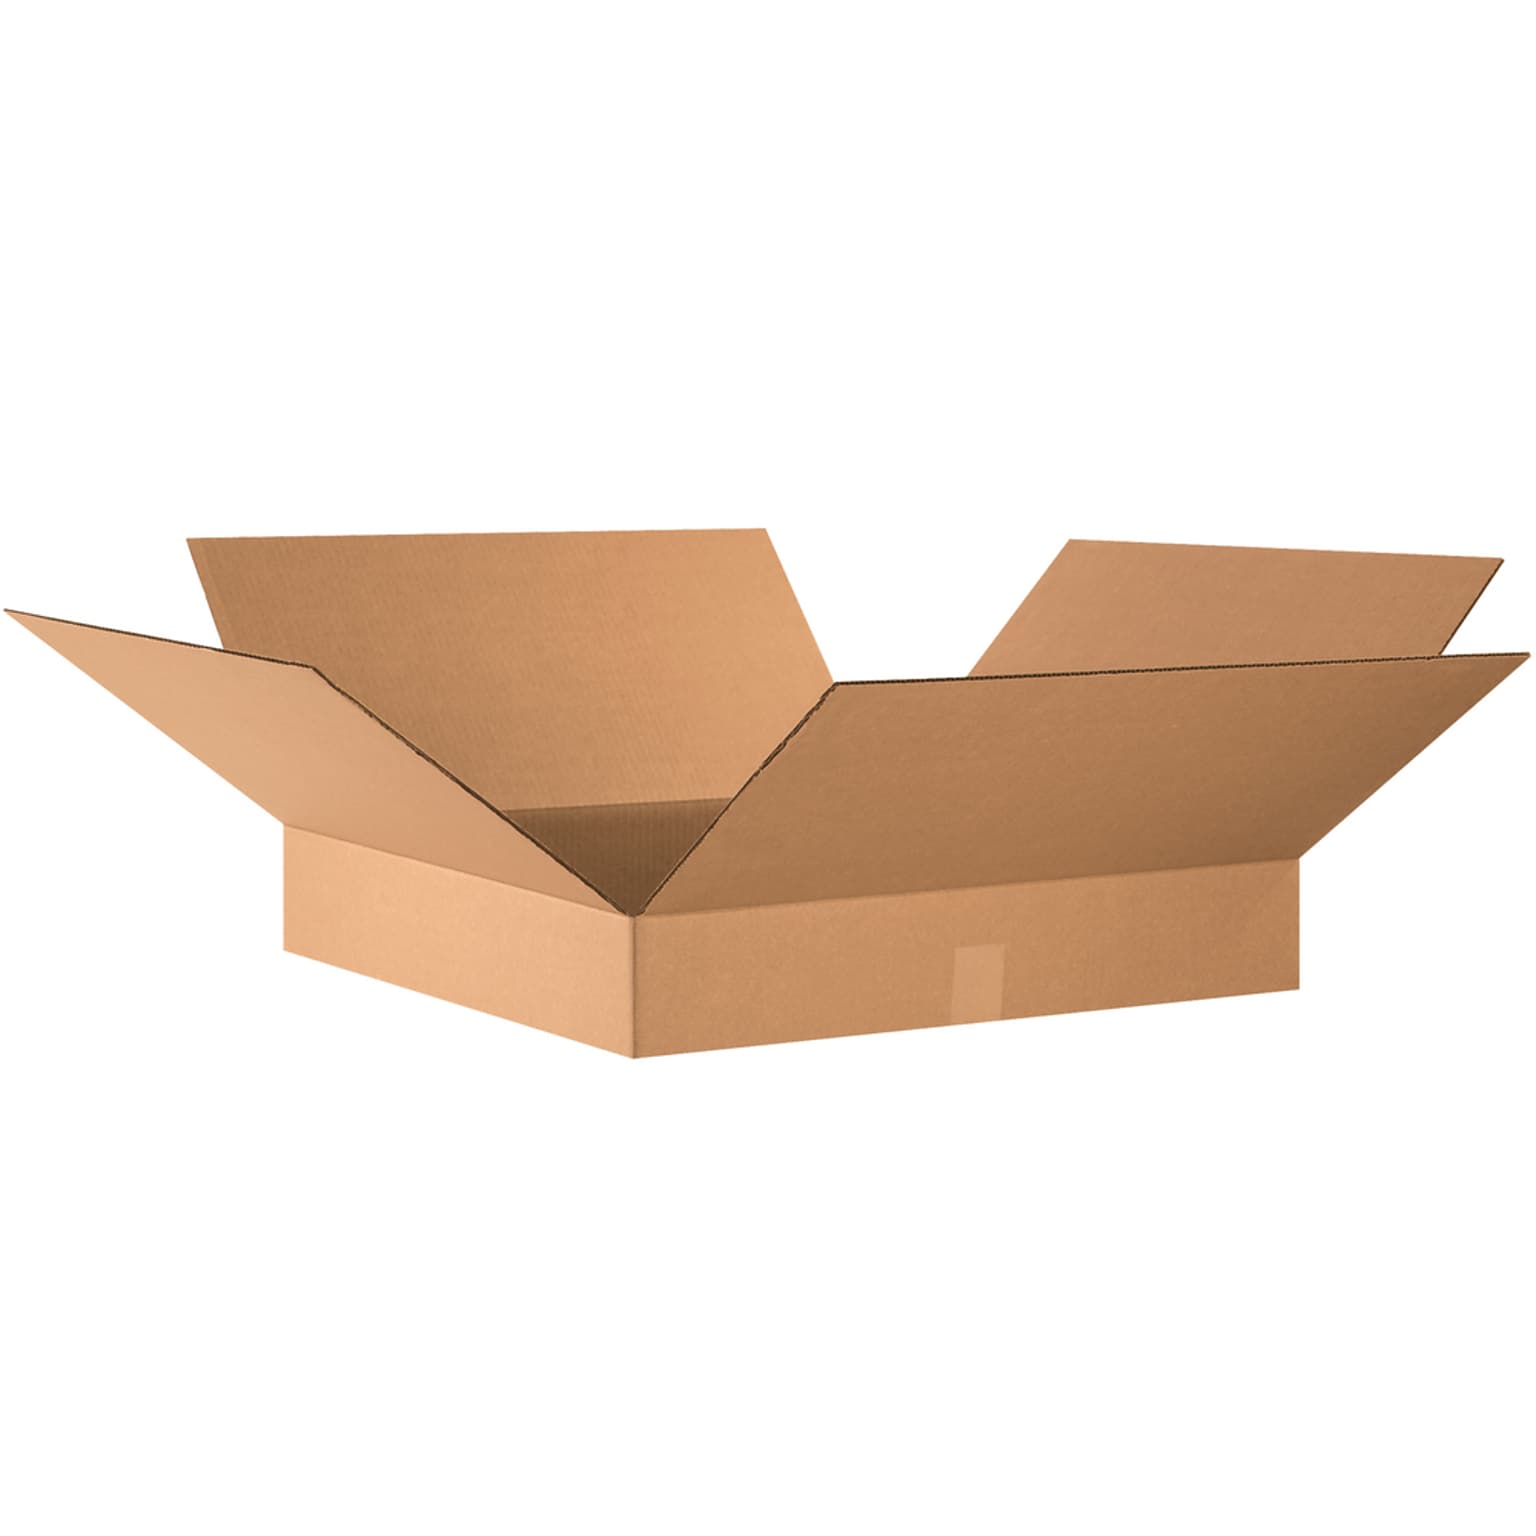 SI Products 24 x 24 x 4 Corrugated Shipping Boxes, 200#/ECT-32 Mullen Rated Corrugated, Pack of 10, (24244)